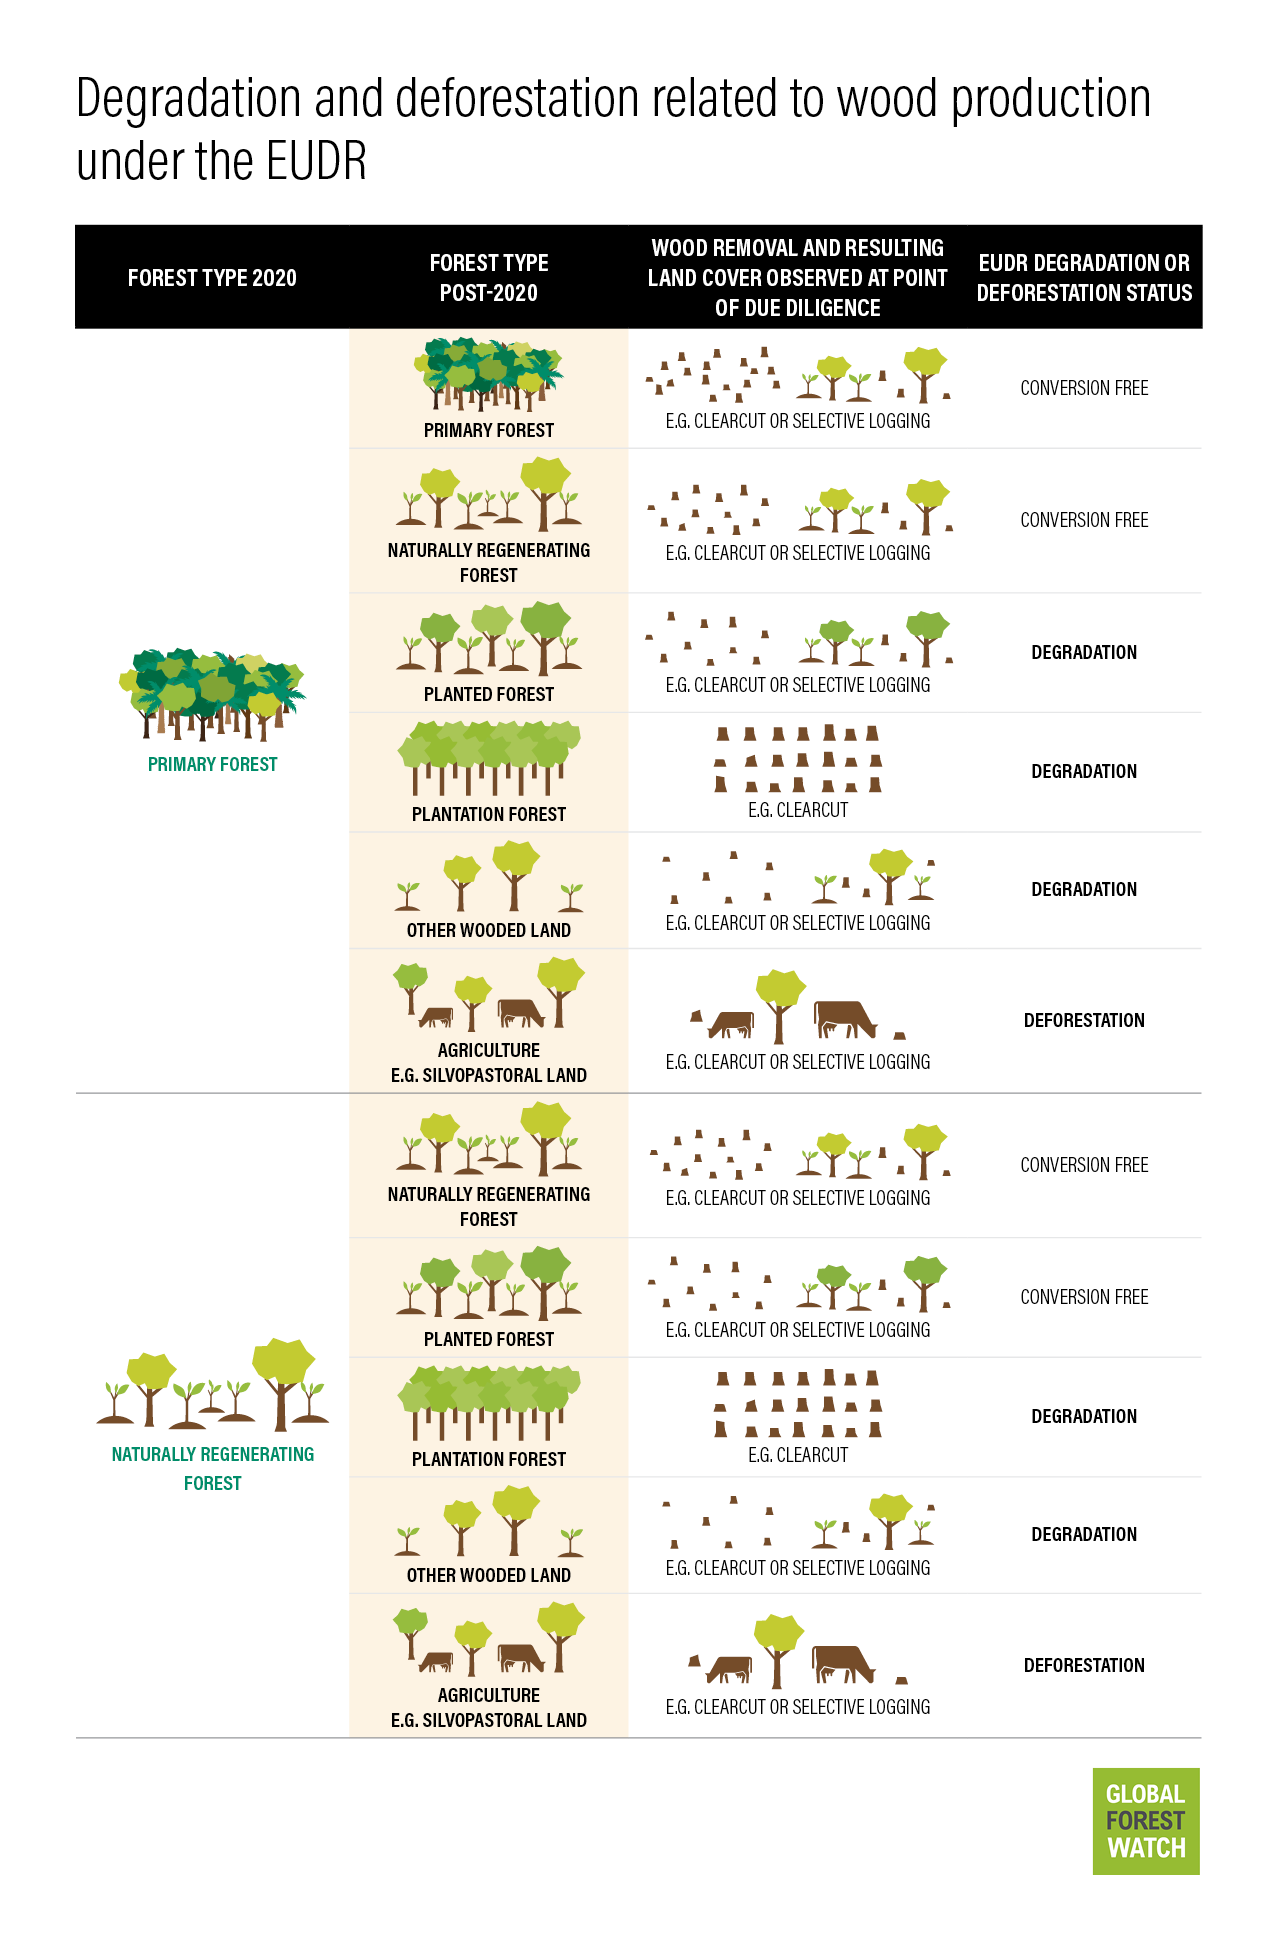 Degradation and deforestation relate to wood production under the EUDR